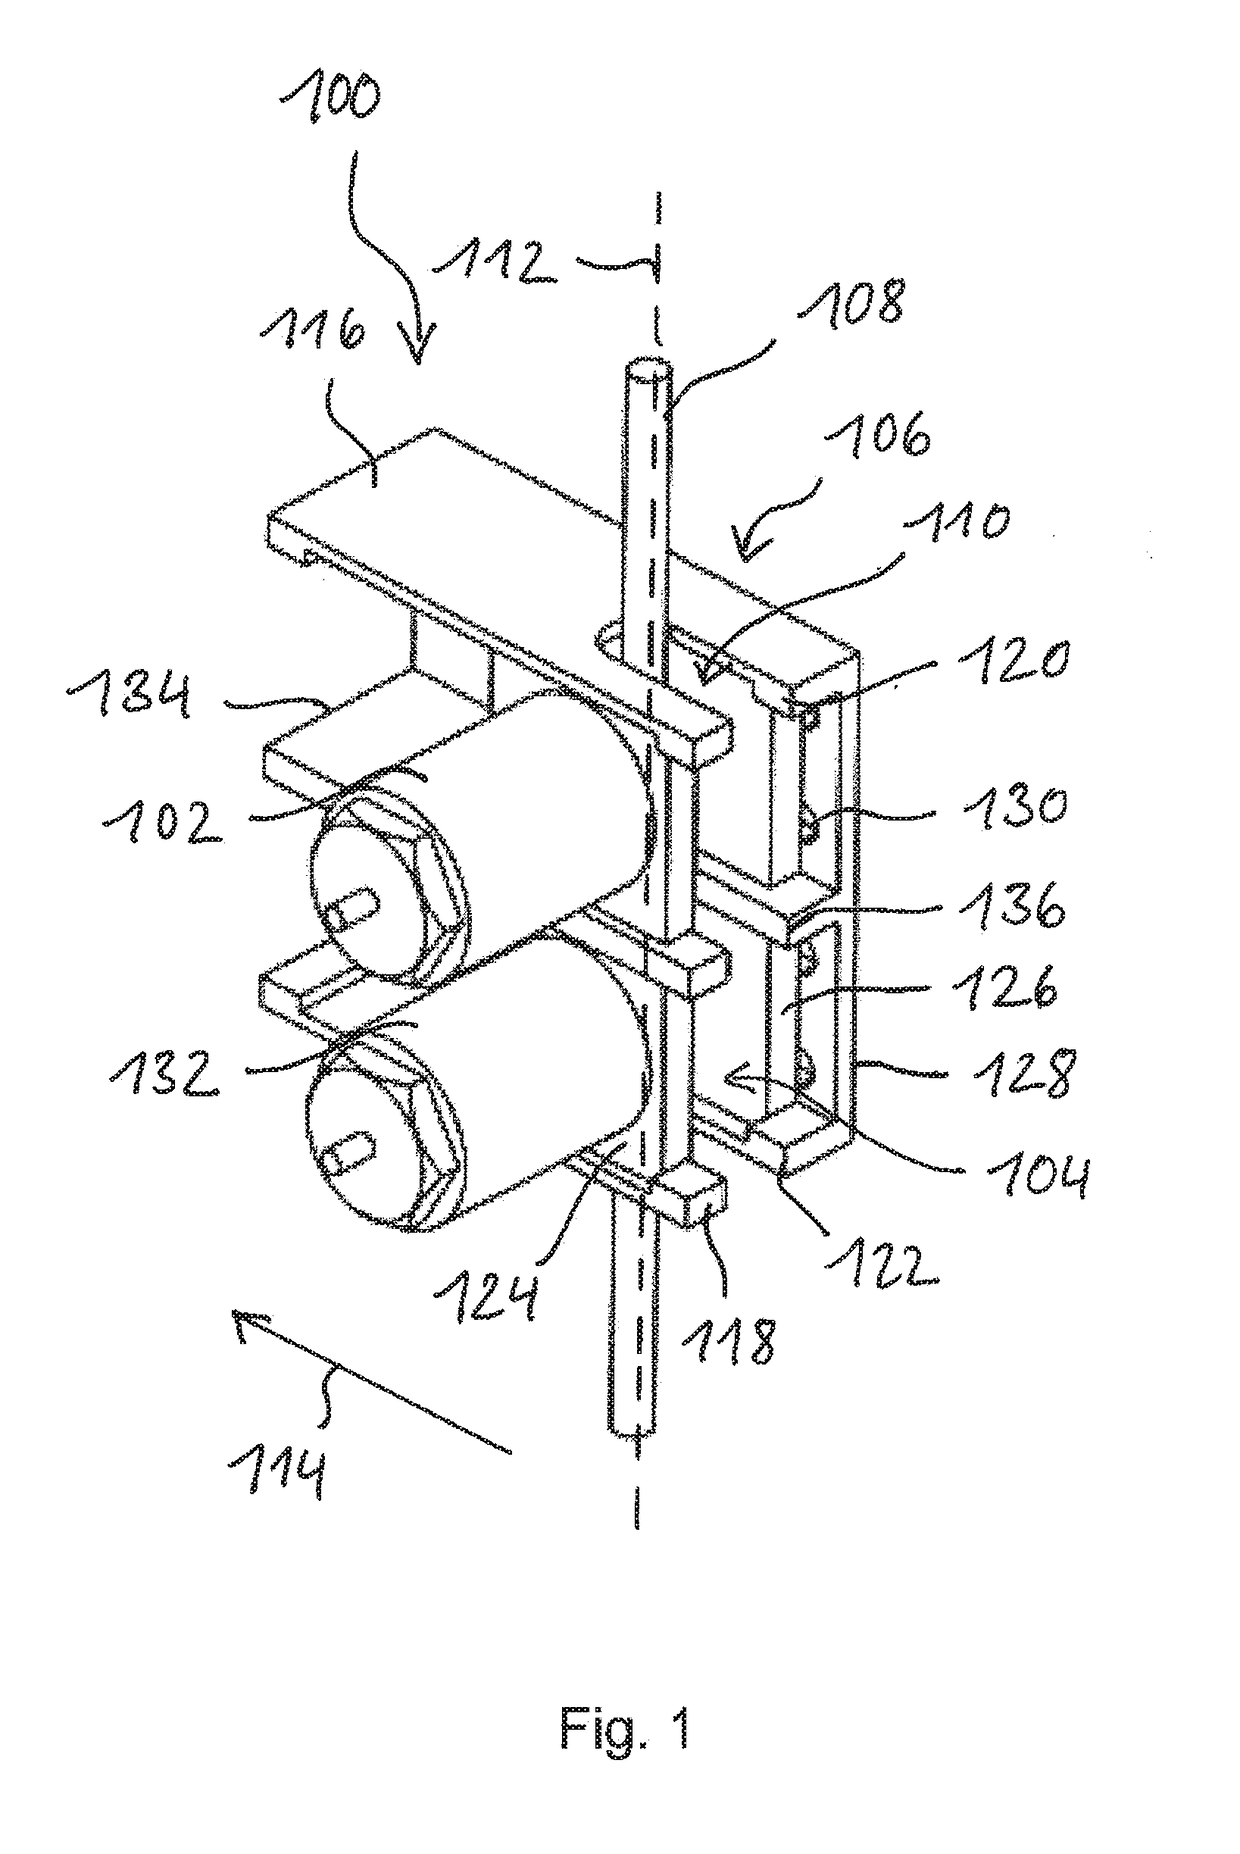 Cable-cutting unit for a cable winch, cable-cutting system for a cable winch and method for operating a cable-cutting unit for a cable winch